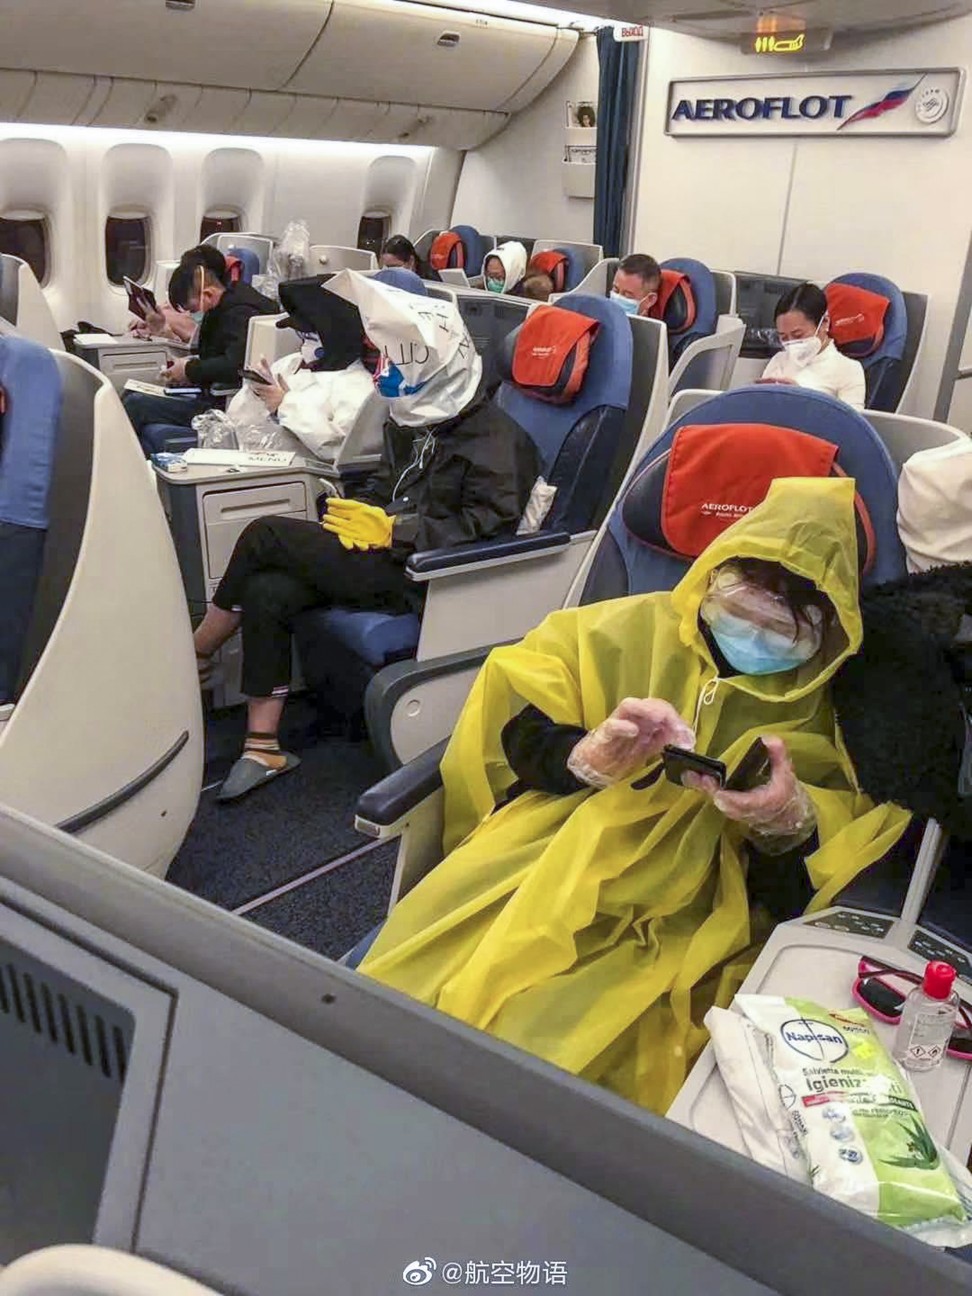 Passengers on a flight from London bound for Hong Kong via Moscow take no chances. Photo: Weibo